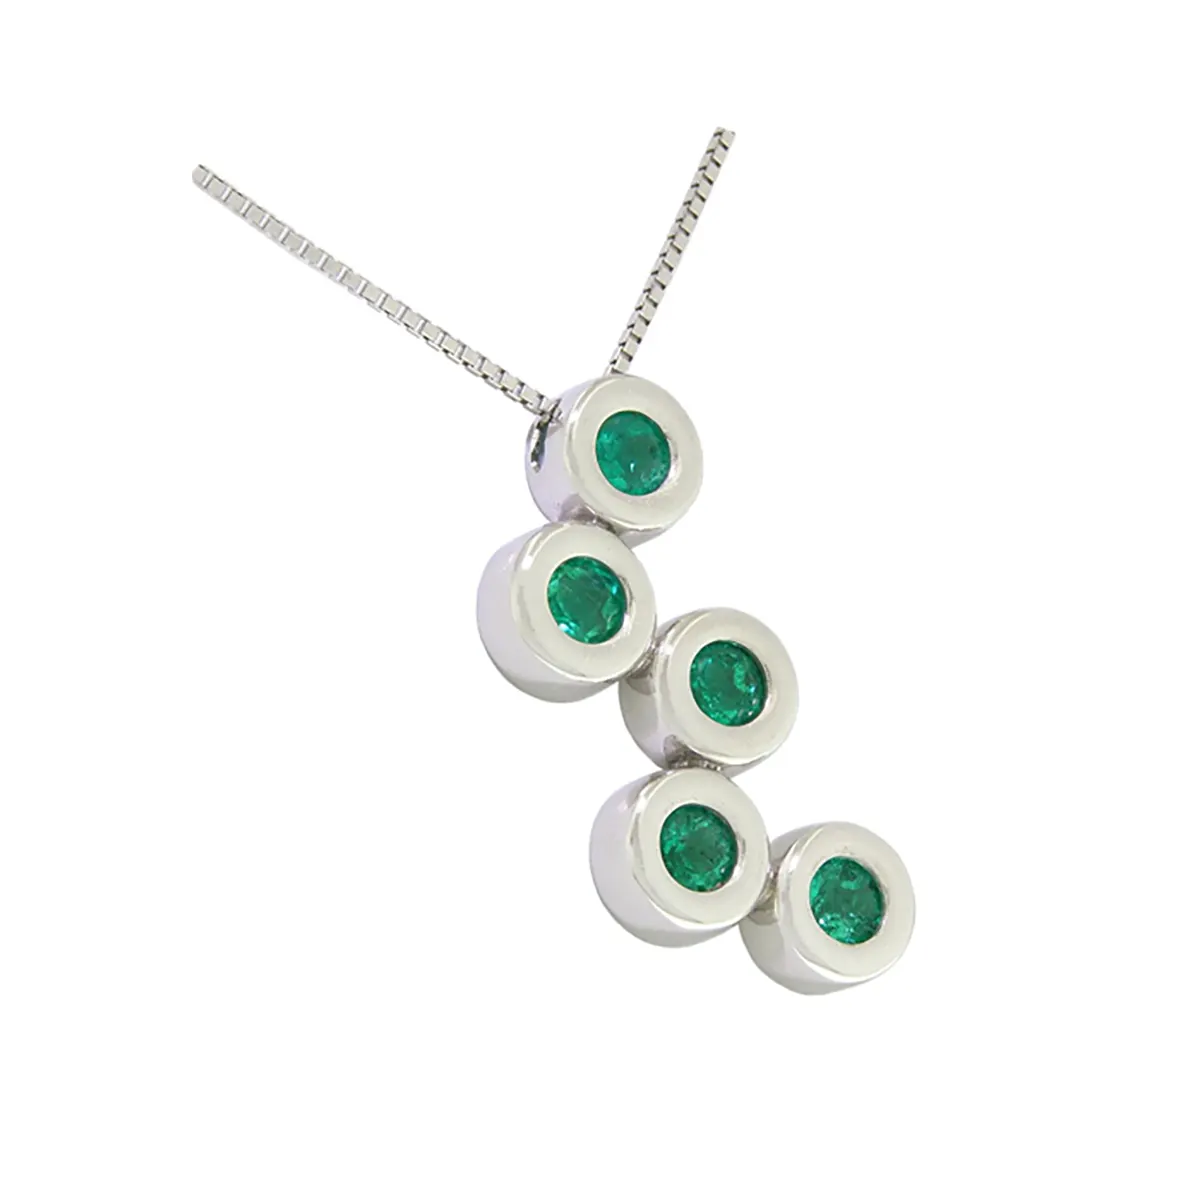 Bezel Set Emerald Necklace in 18K White Gold with 5 Round Cut Emeralds